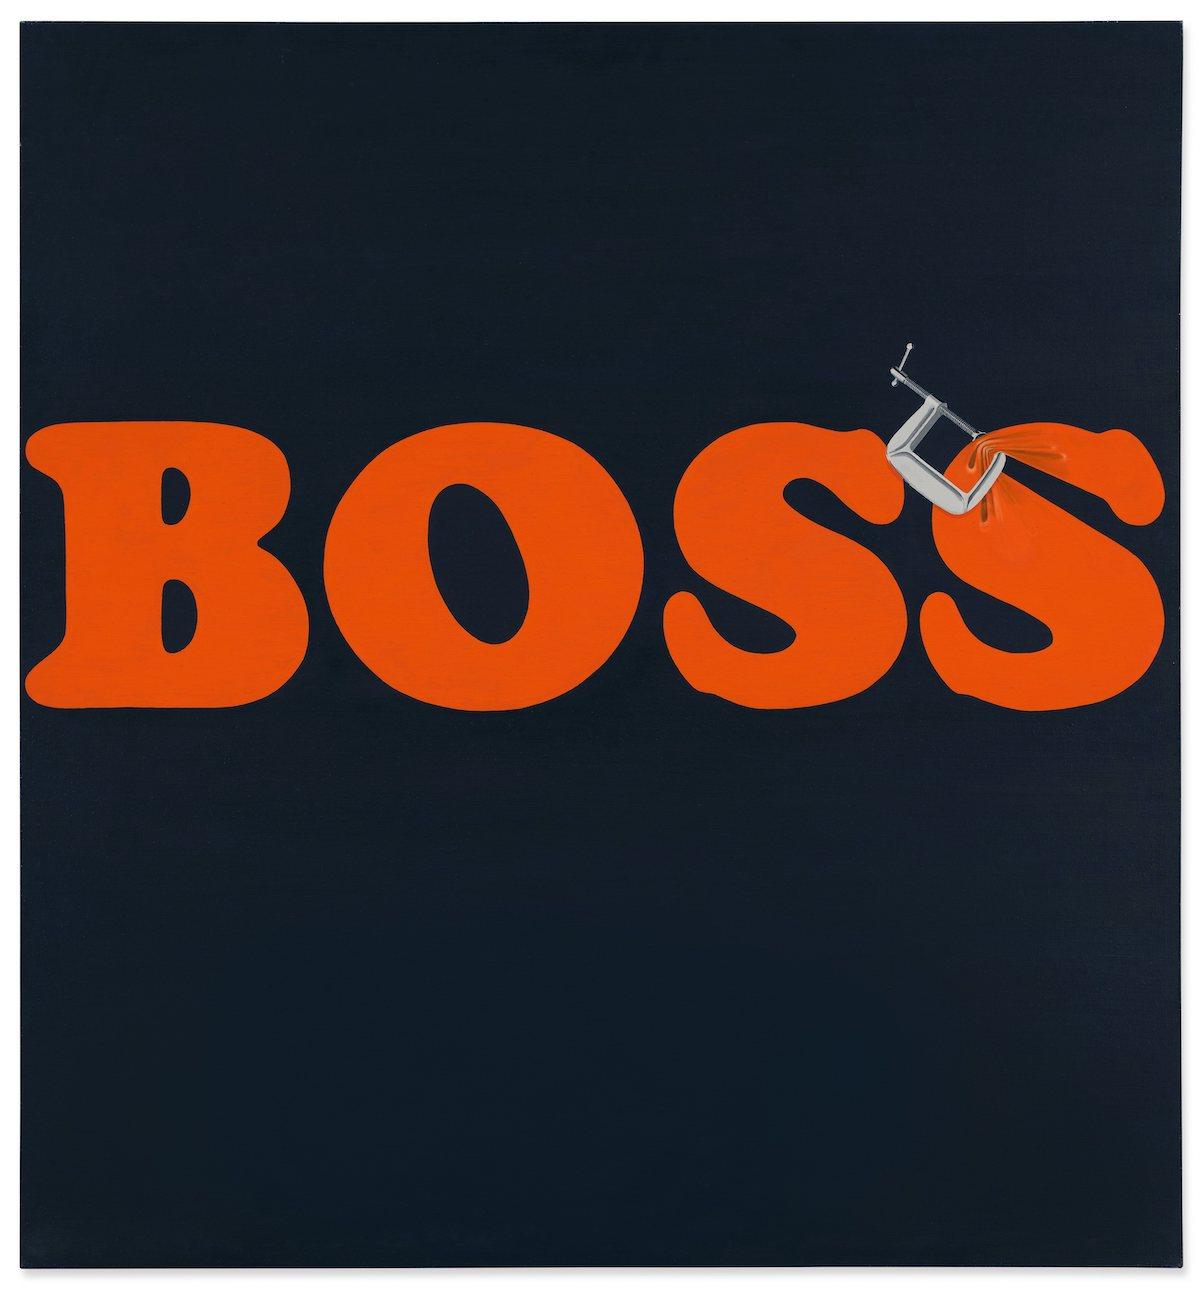 Ed Ruscha, Securing the Last Letter (Boss), 1964 Oil on canvas, 59 x 55 1/8 in. / 149.9 x 140 cm. Courtesy Sotheby's.